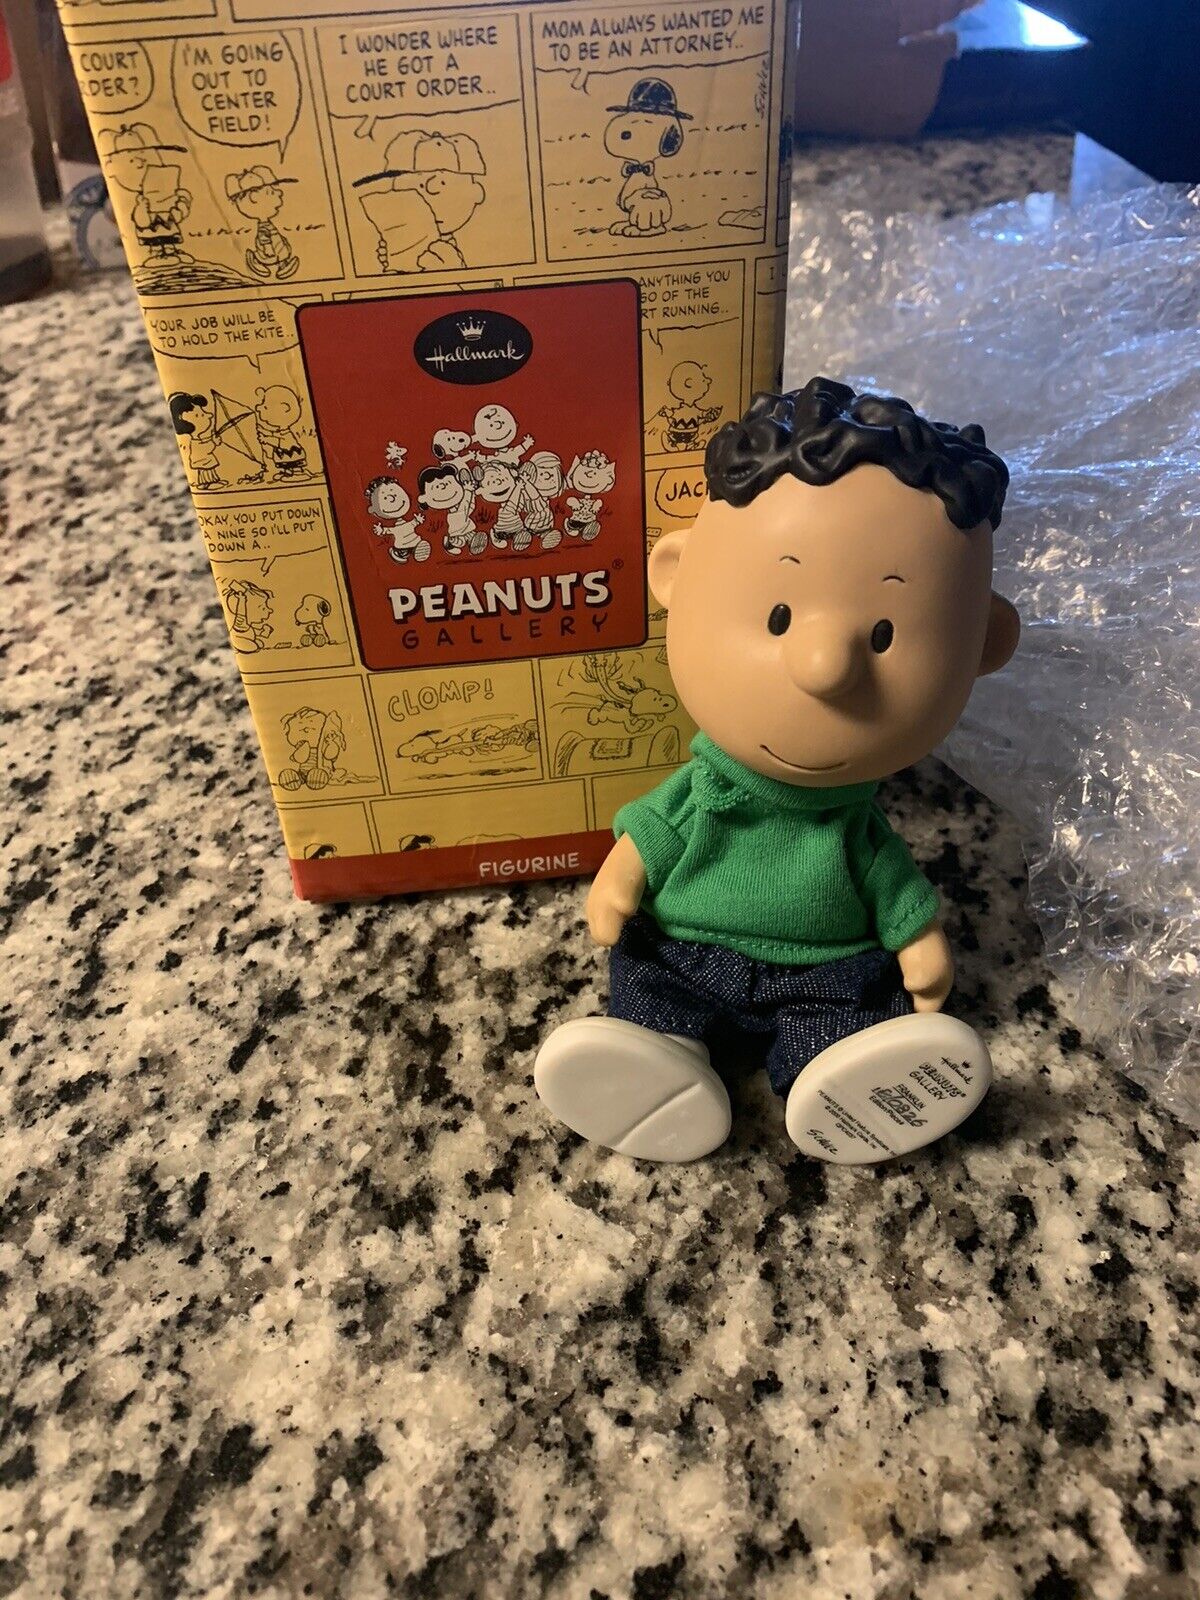 Hallmark Peanuts Gallery Franklin Figurine in Box Pre-Owned QPC4037 No Papers